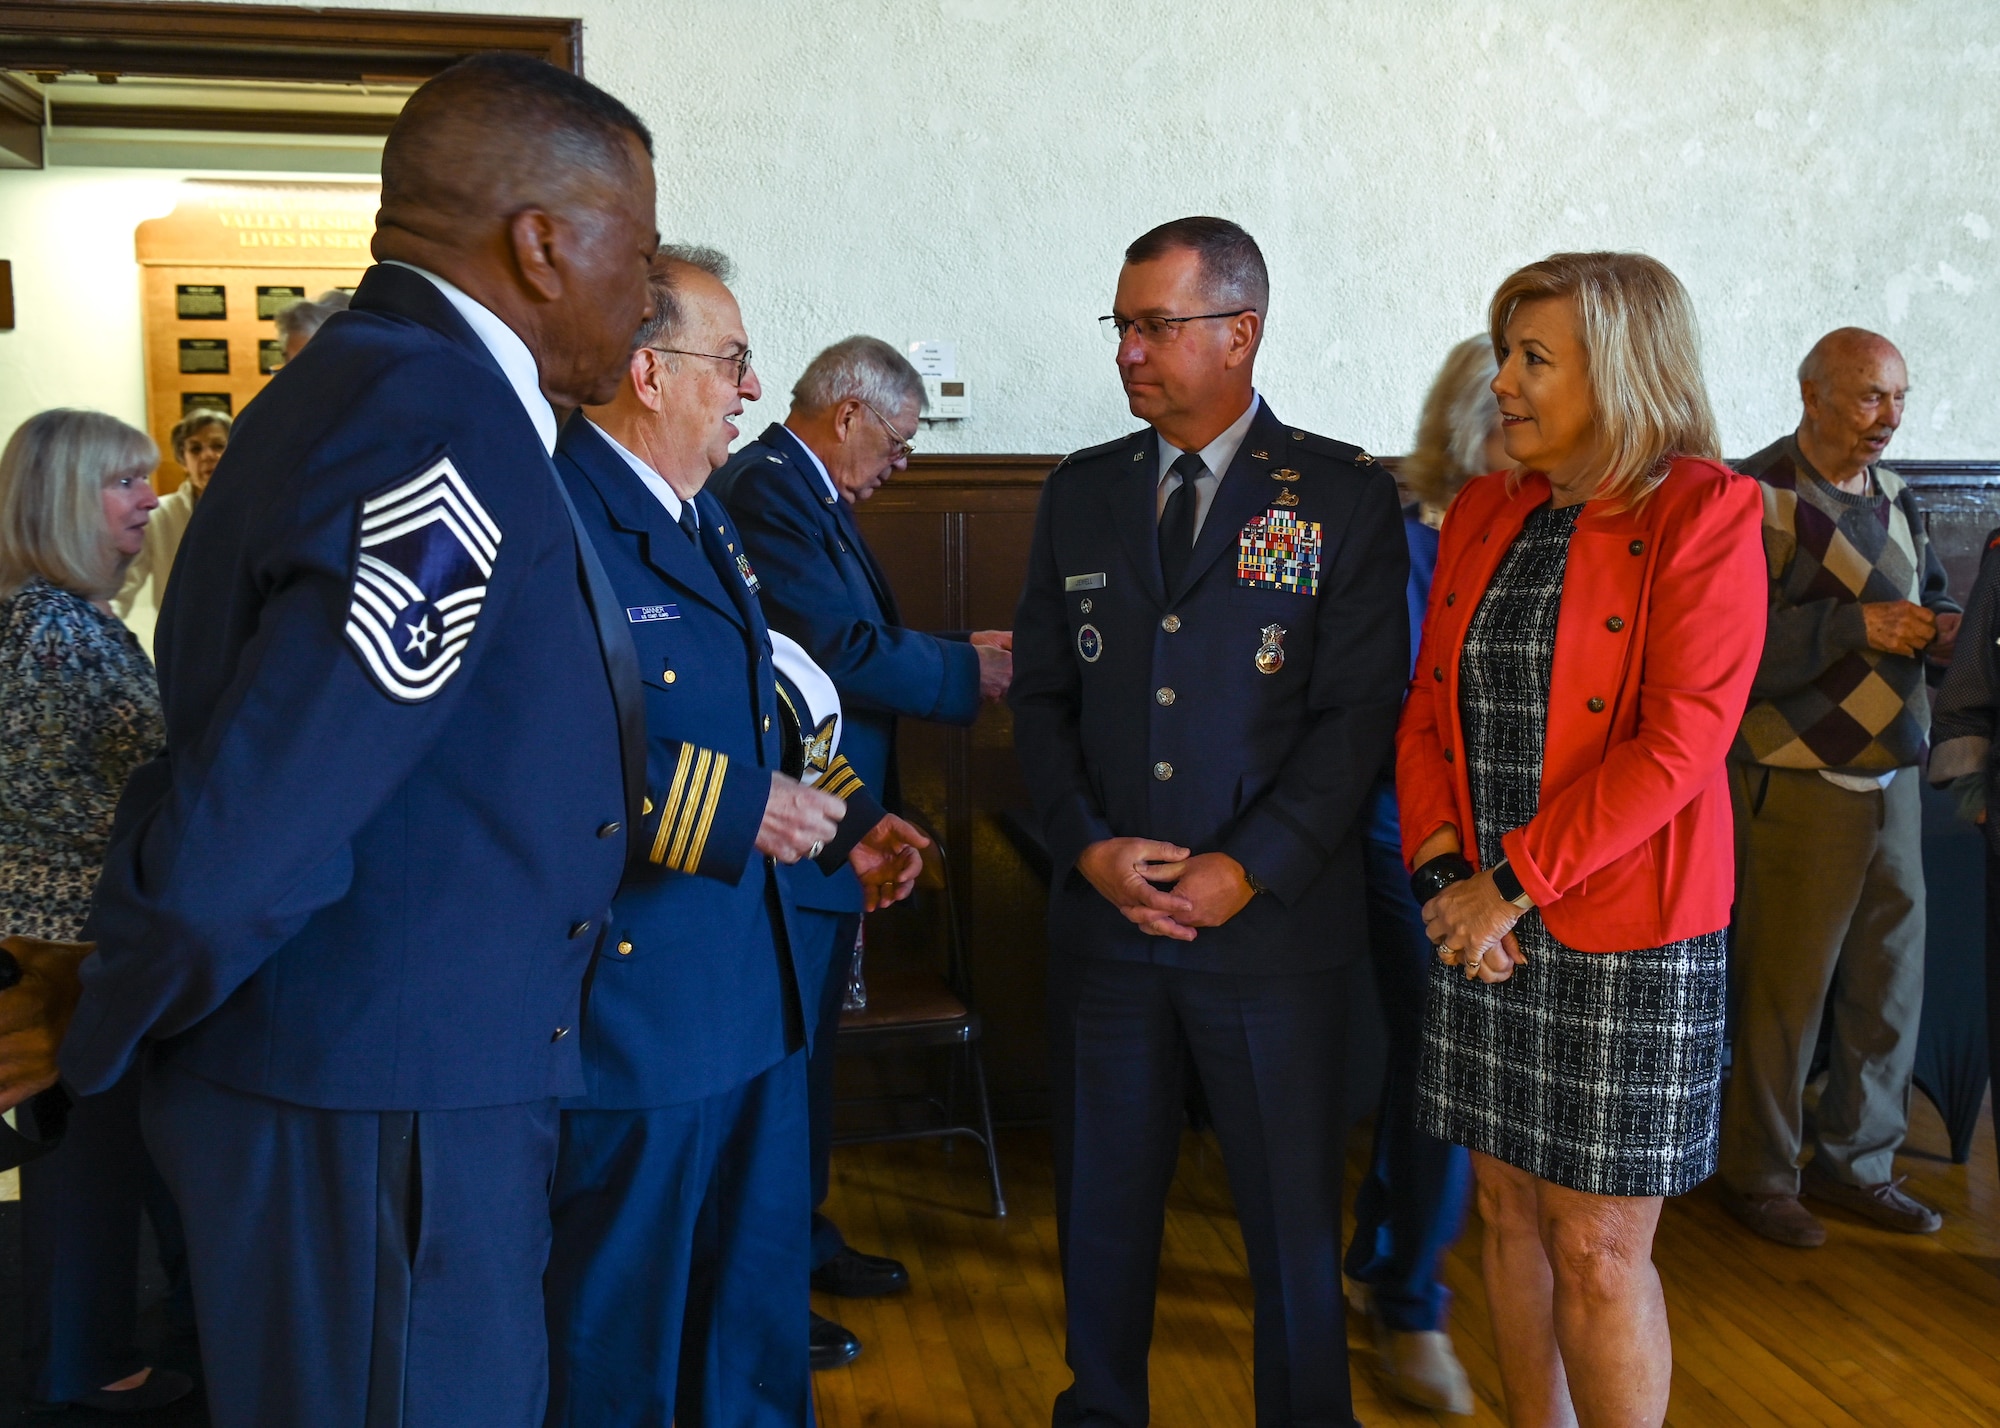 Space Launch Delta 30 vice commander, and his spouse, speaks with retired service members during the Veterans Day ceremony at the Solvang Veterans Memorial Hall.